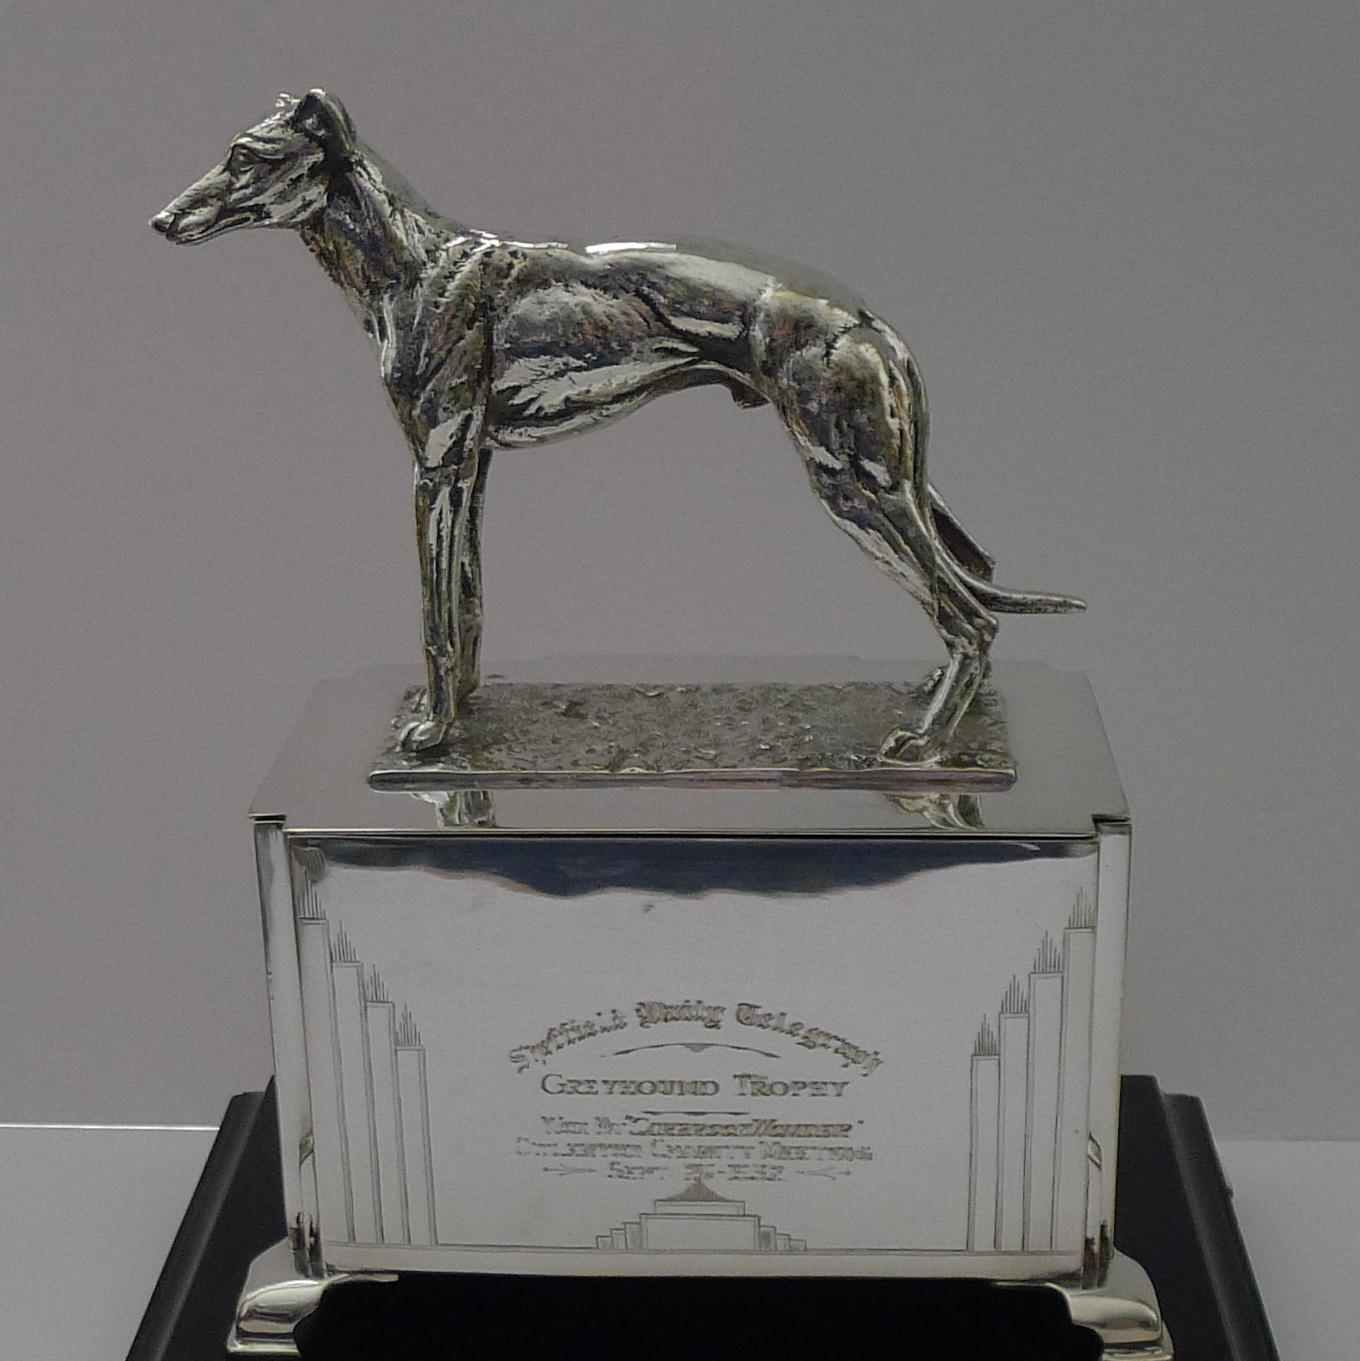 A stunning Art Deco trophy / box; topped with a beautifully executed bronze or brass cast Greyhound, finished in silver plate.

The box has some beautiful engraved Art Deco decoration on all sides and the trophy also engraved 